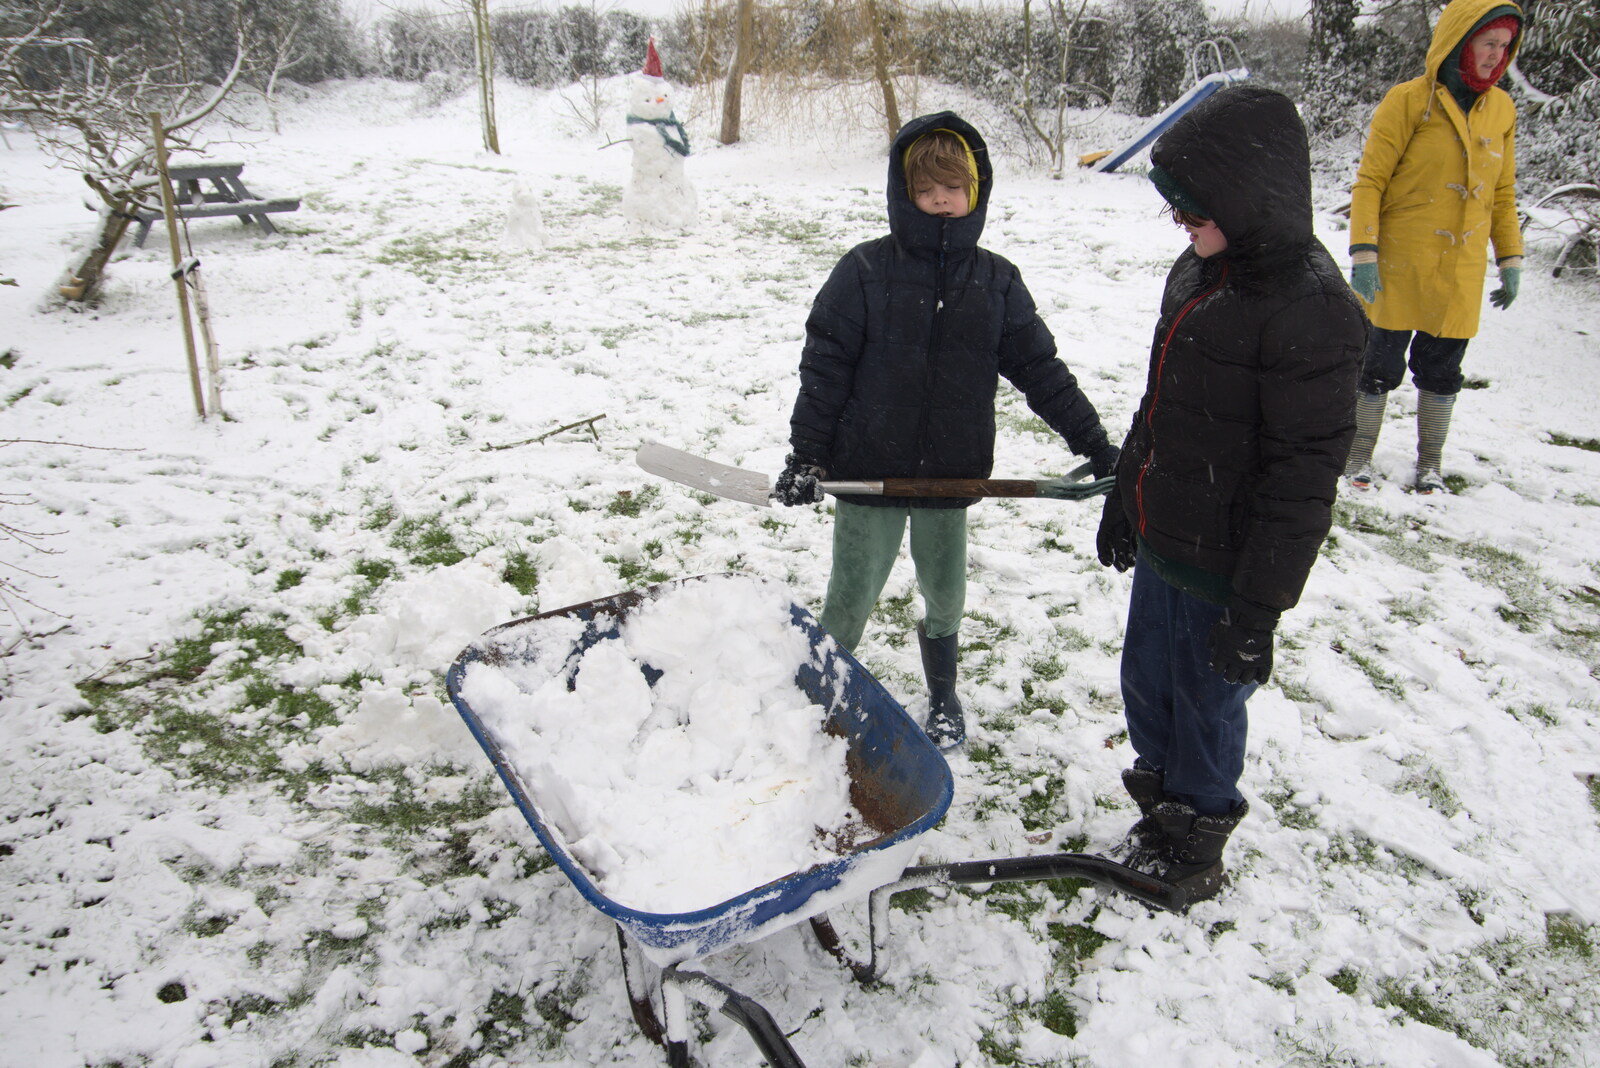 The boys collect snow to make an igloo from Beast From The East Two - The Sequel, Brome, Suffolk - 8th February 2021